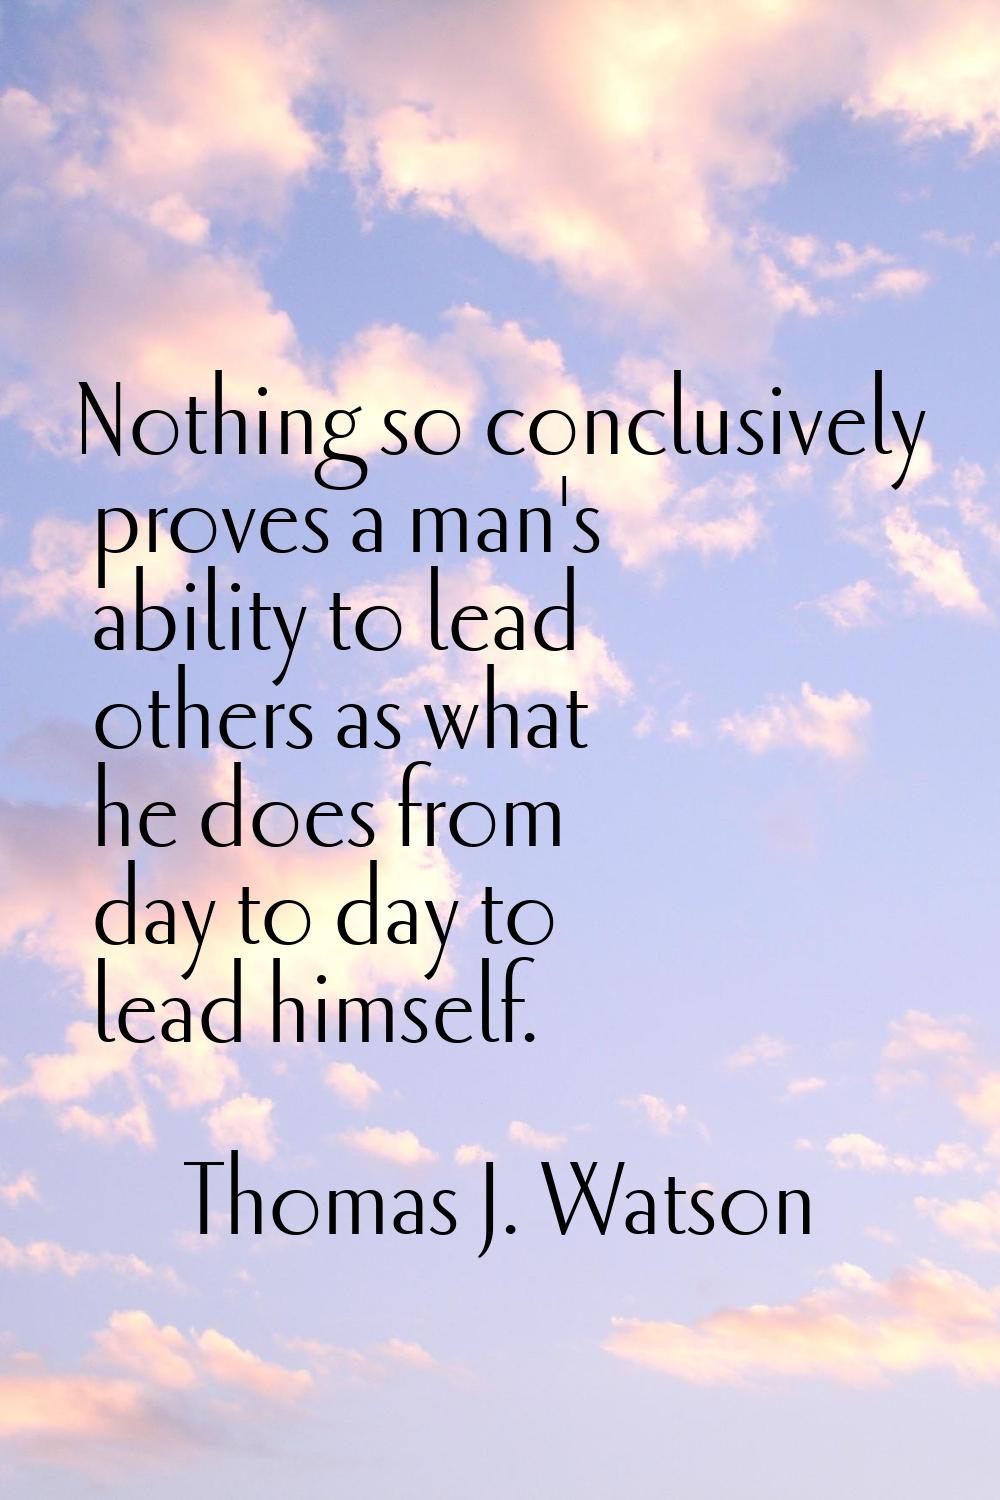 Nothing so conclusively proves a man's ability to lead others as what he does from day to day to le